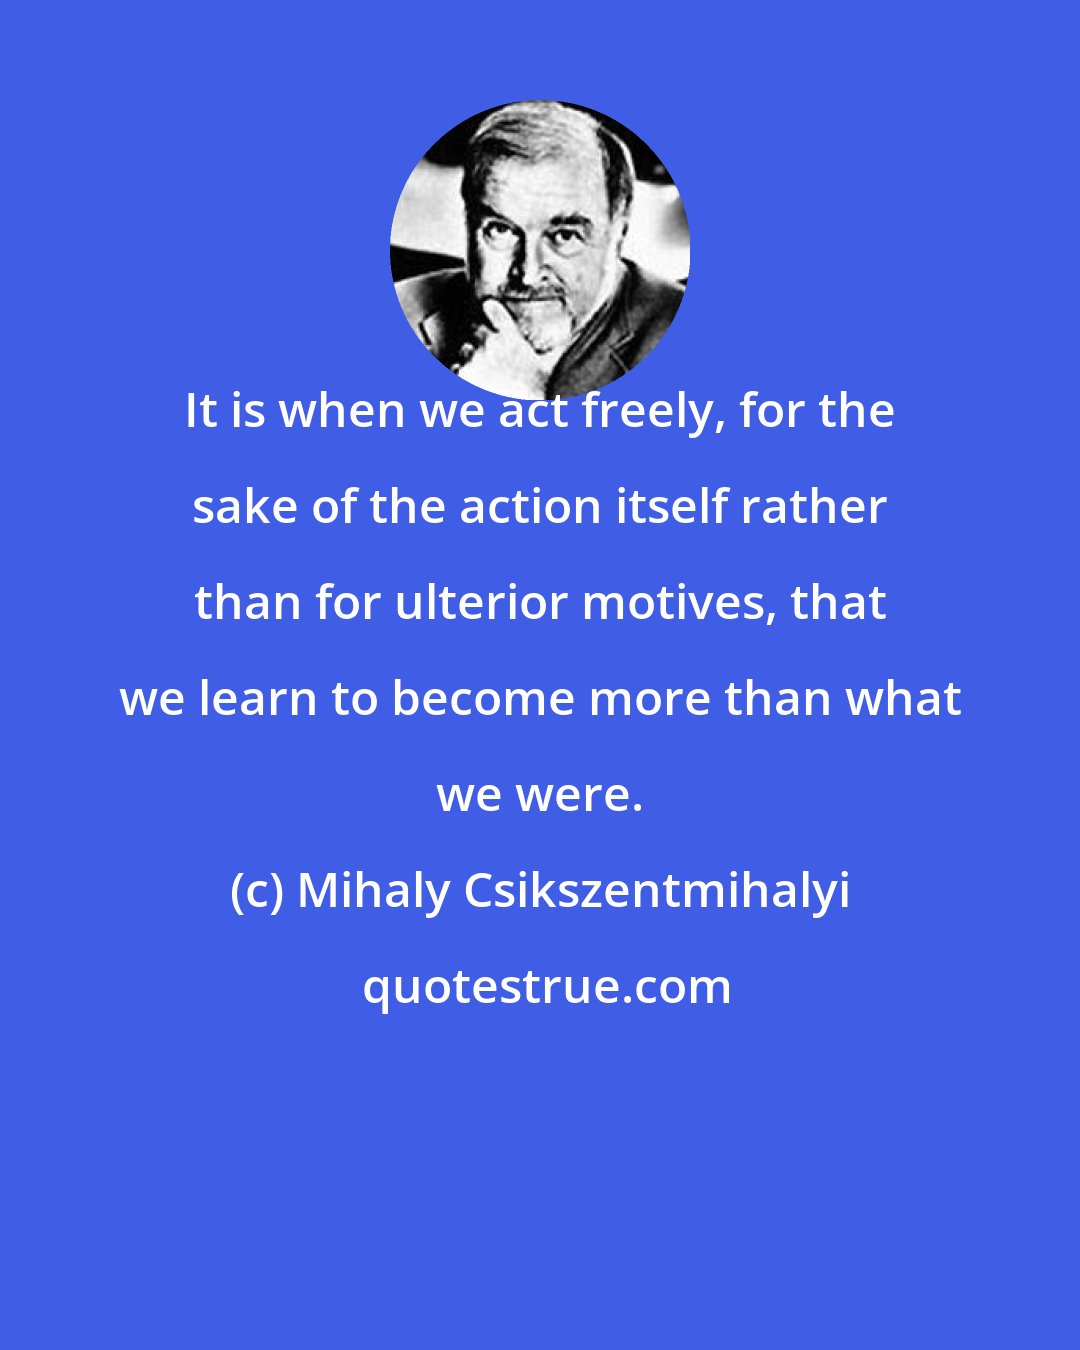 Mihaly Csikszentmihalyi: It is when we act freely, for the sake of the action itself rather than for ulterior motives, that we learn to become more than what we were.